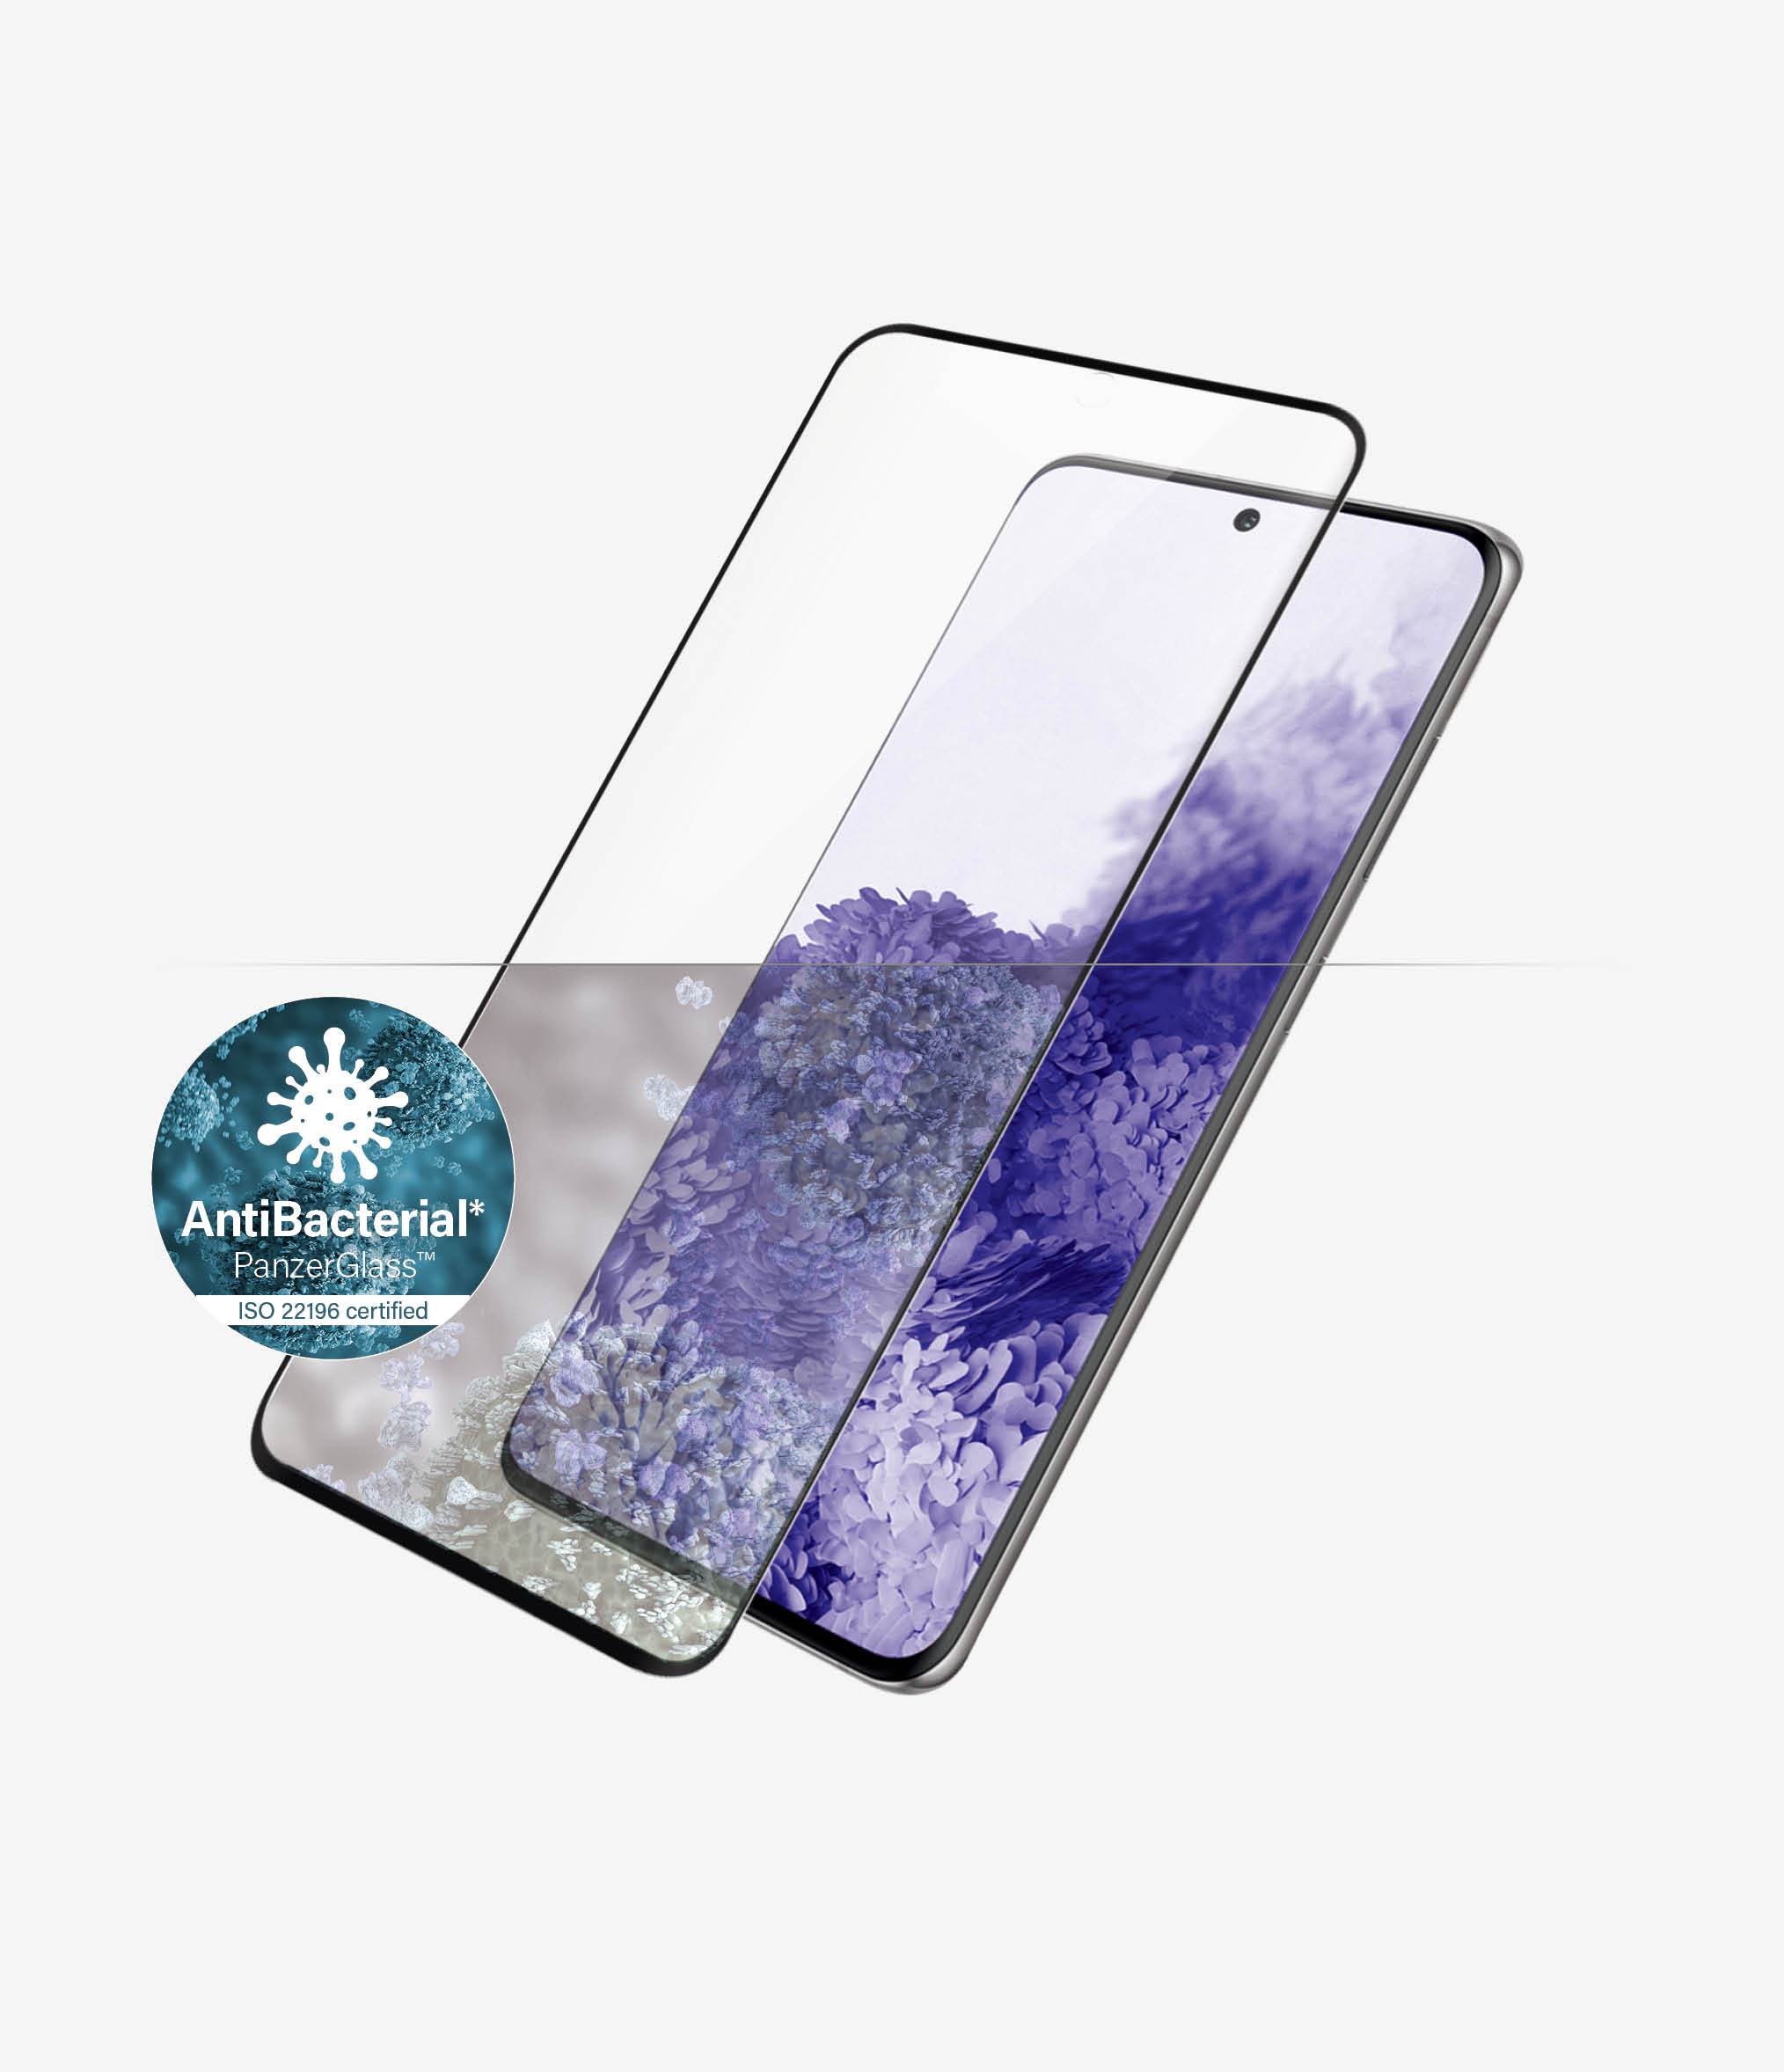 PanzerGlass™ Samsung Galaxy S21 Ultra - Clear Glass (7265) - Screen Protector - Full frame coverage, Rounded edges, Crystal clear, Anti-Bacterial